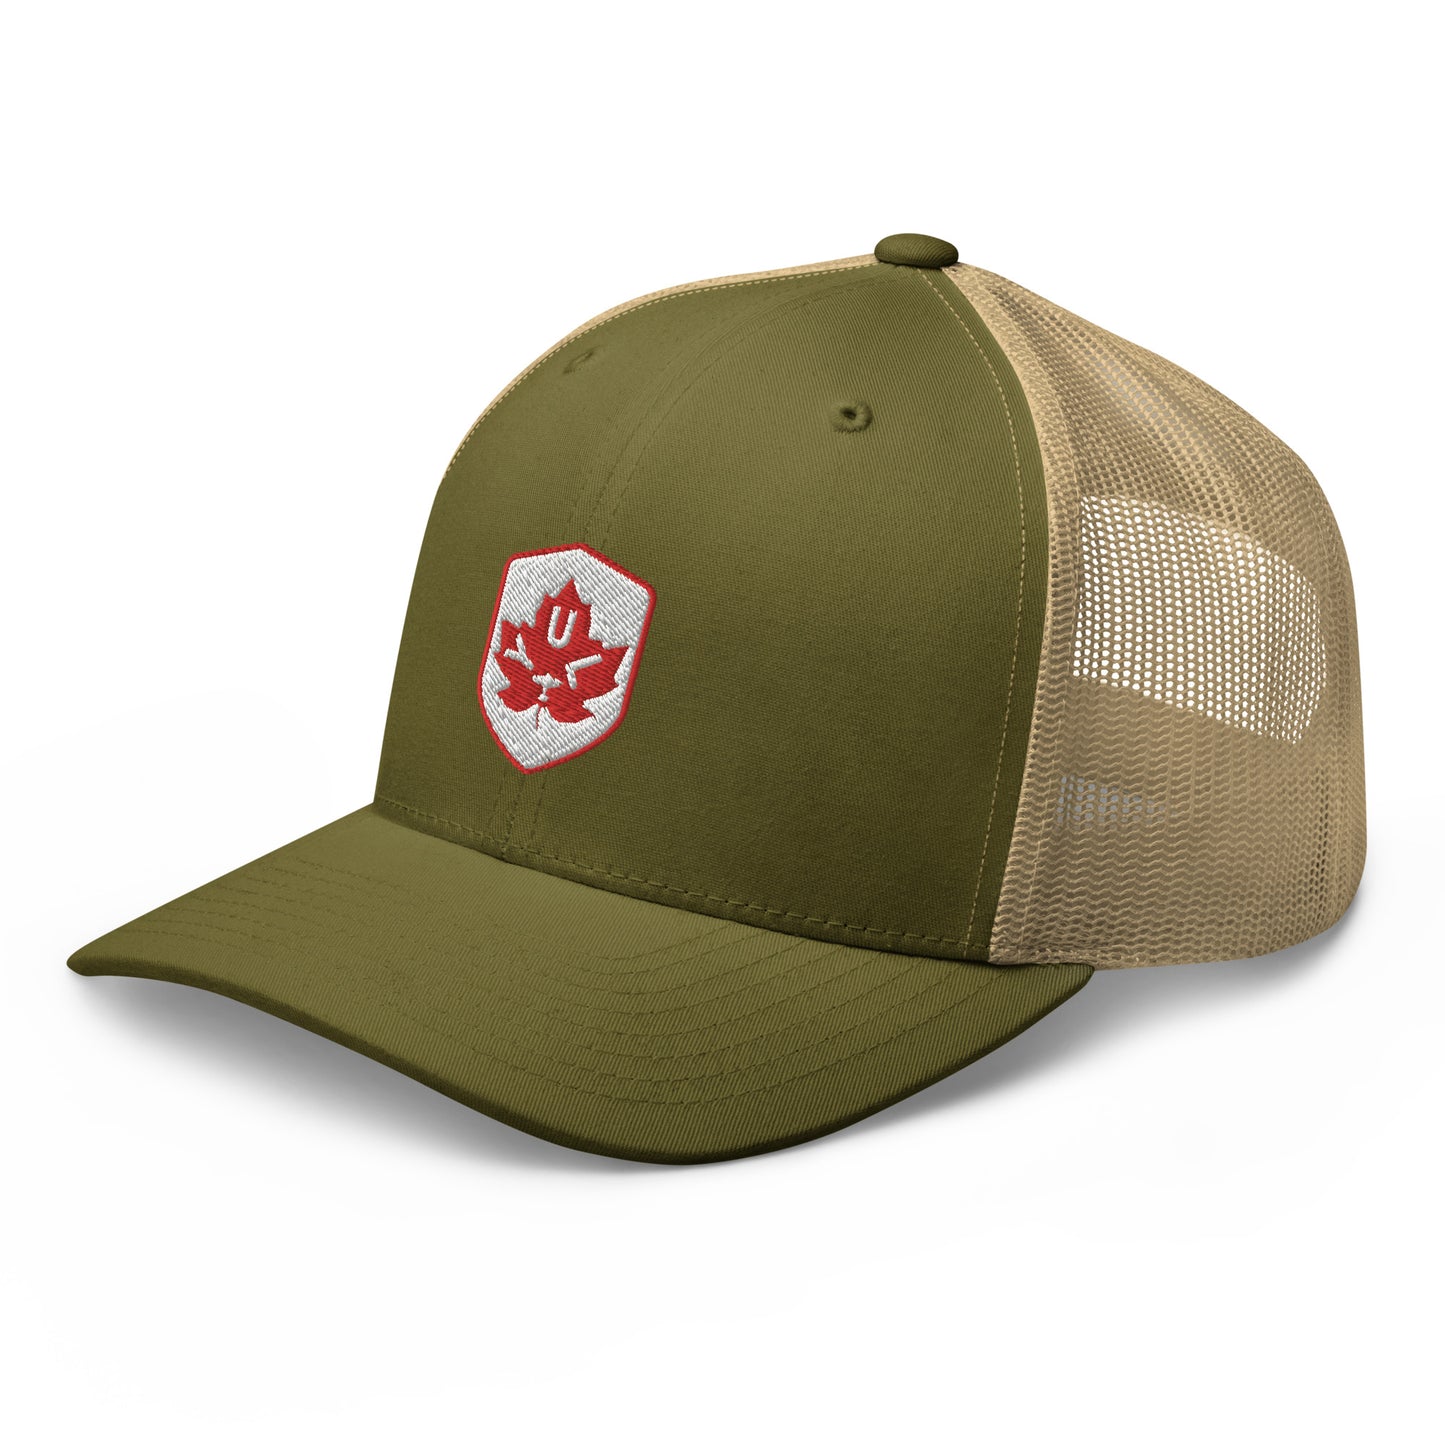 Maple Leaf Trucker Hat - Red/White • YUL Montreal • YHM Designs - Image 31